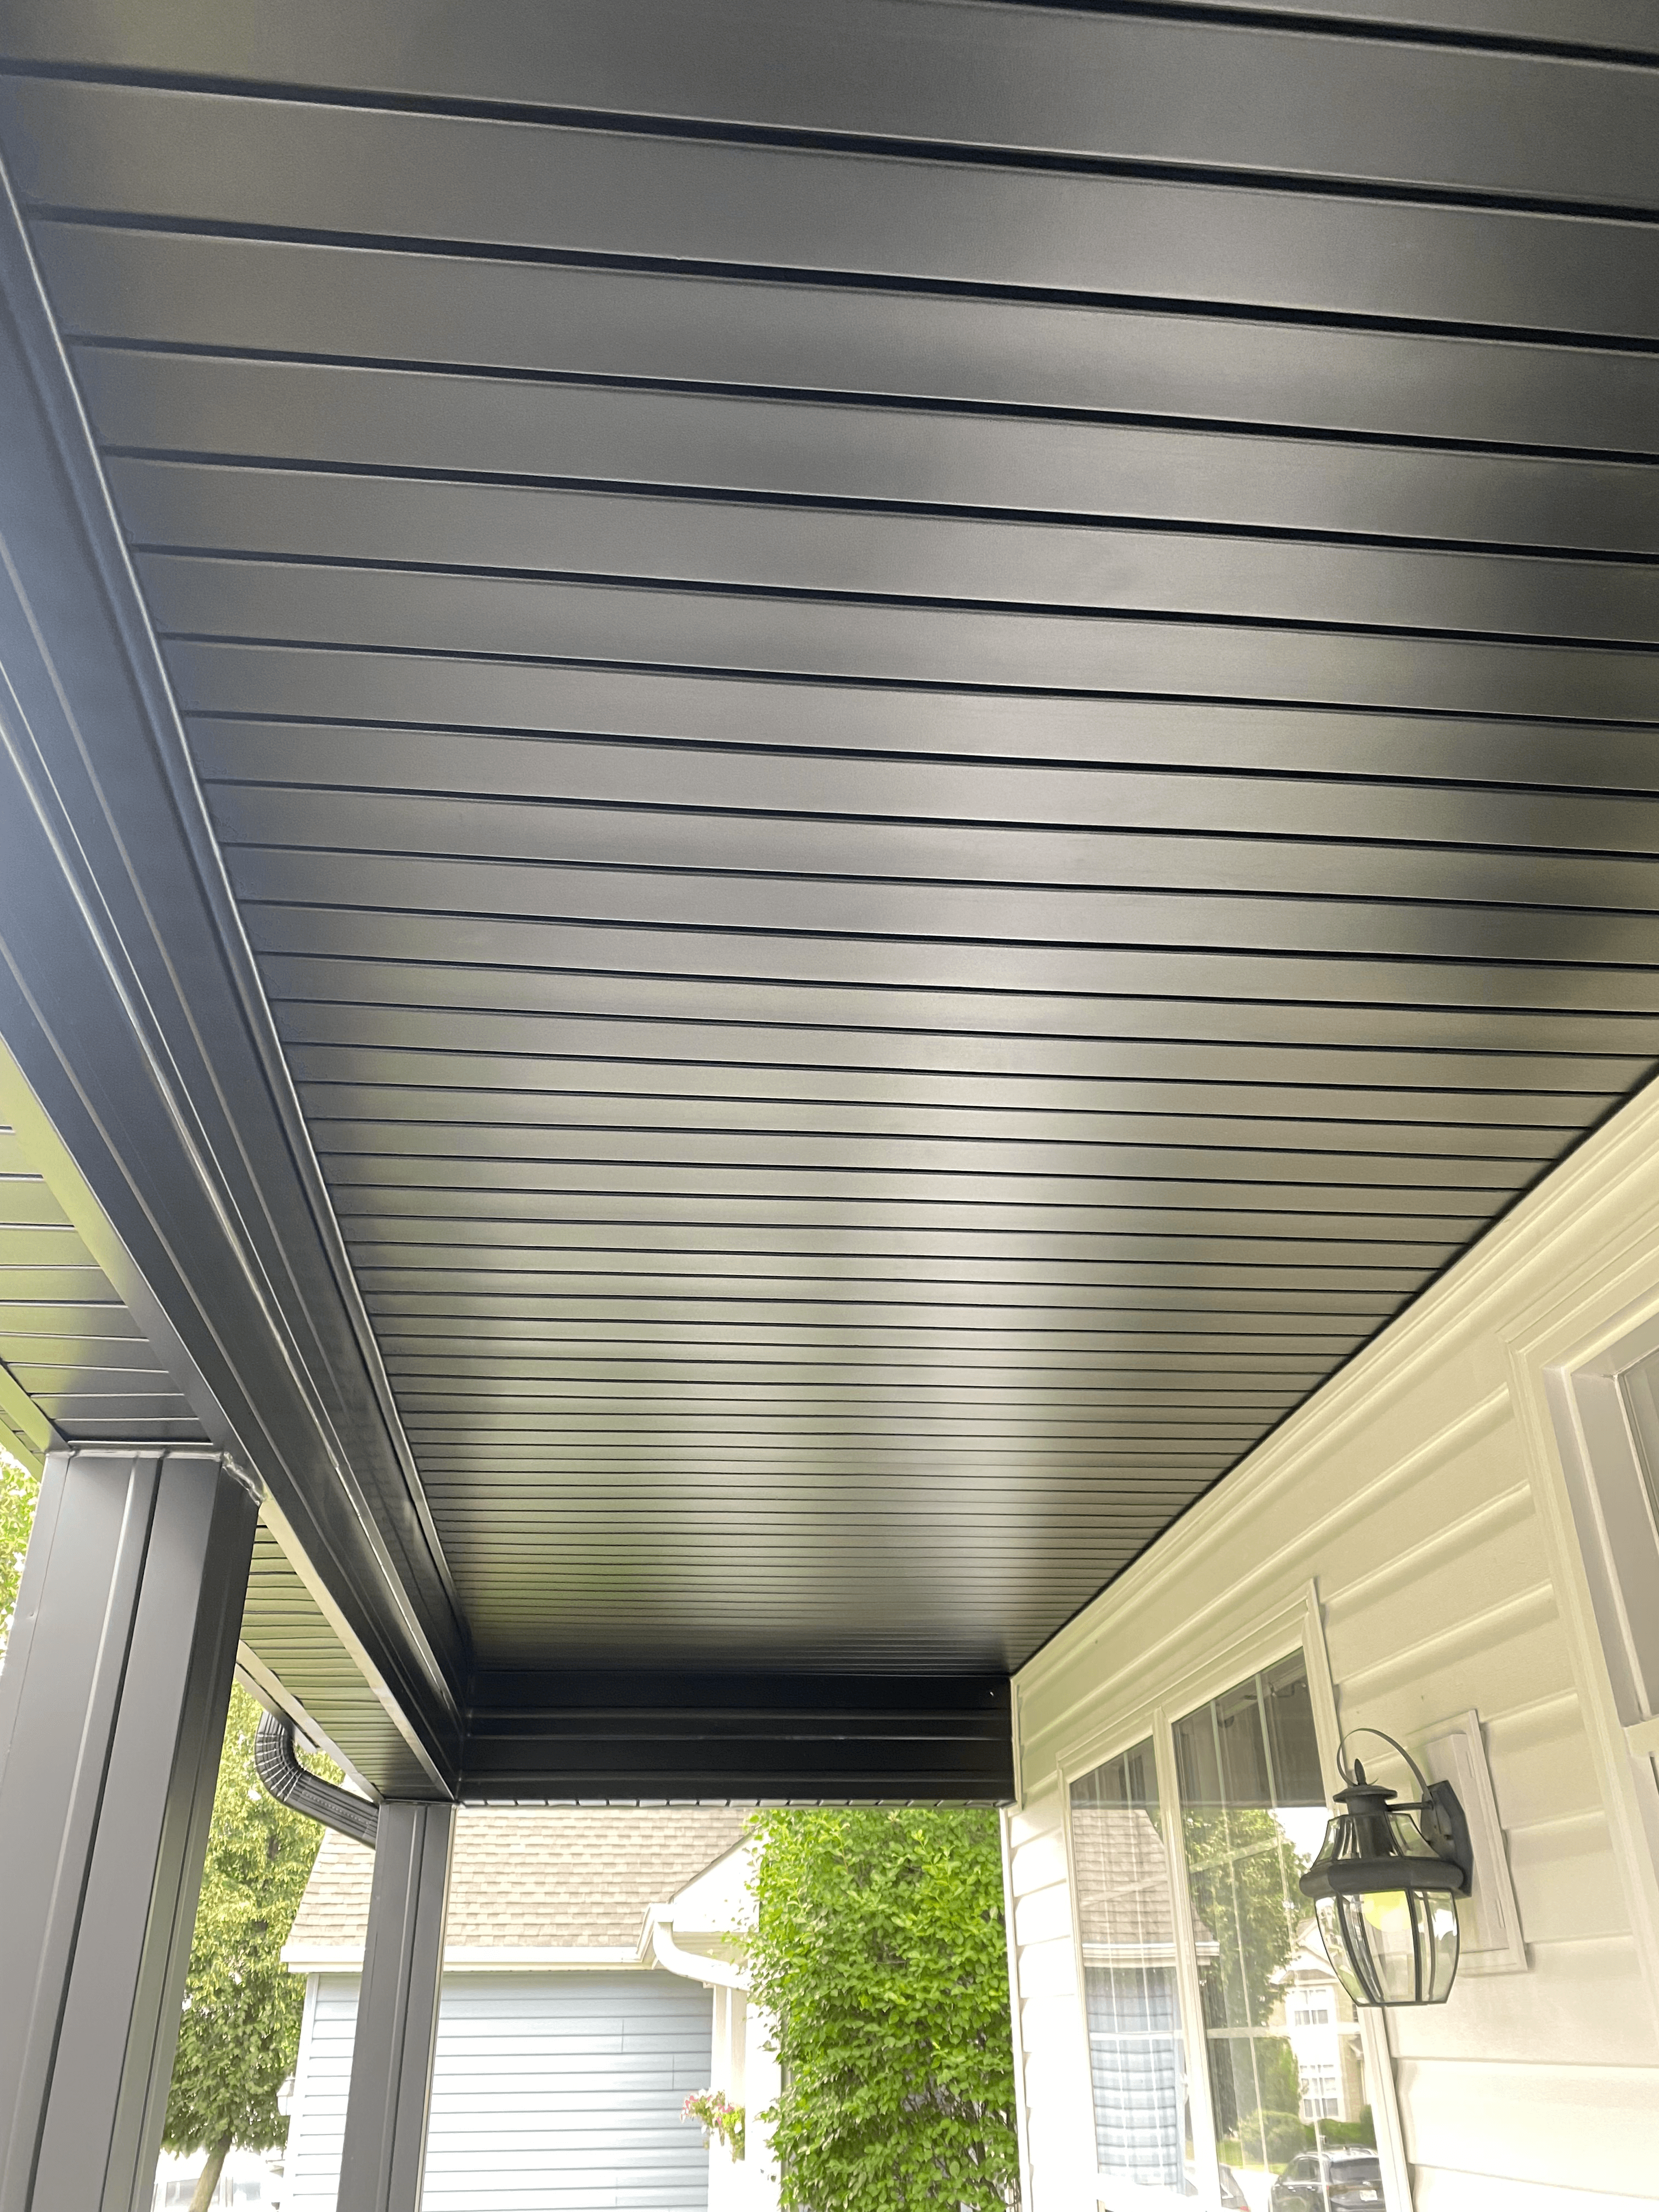 Certainteed Landmark Roof in Moire Black and White Dutchlap Vinyl Siding - Gurnee IL